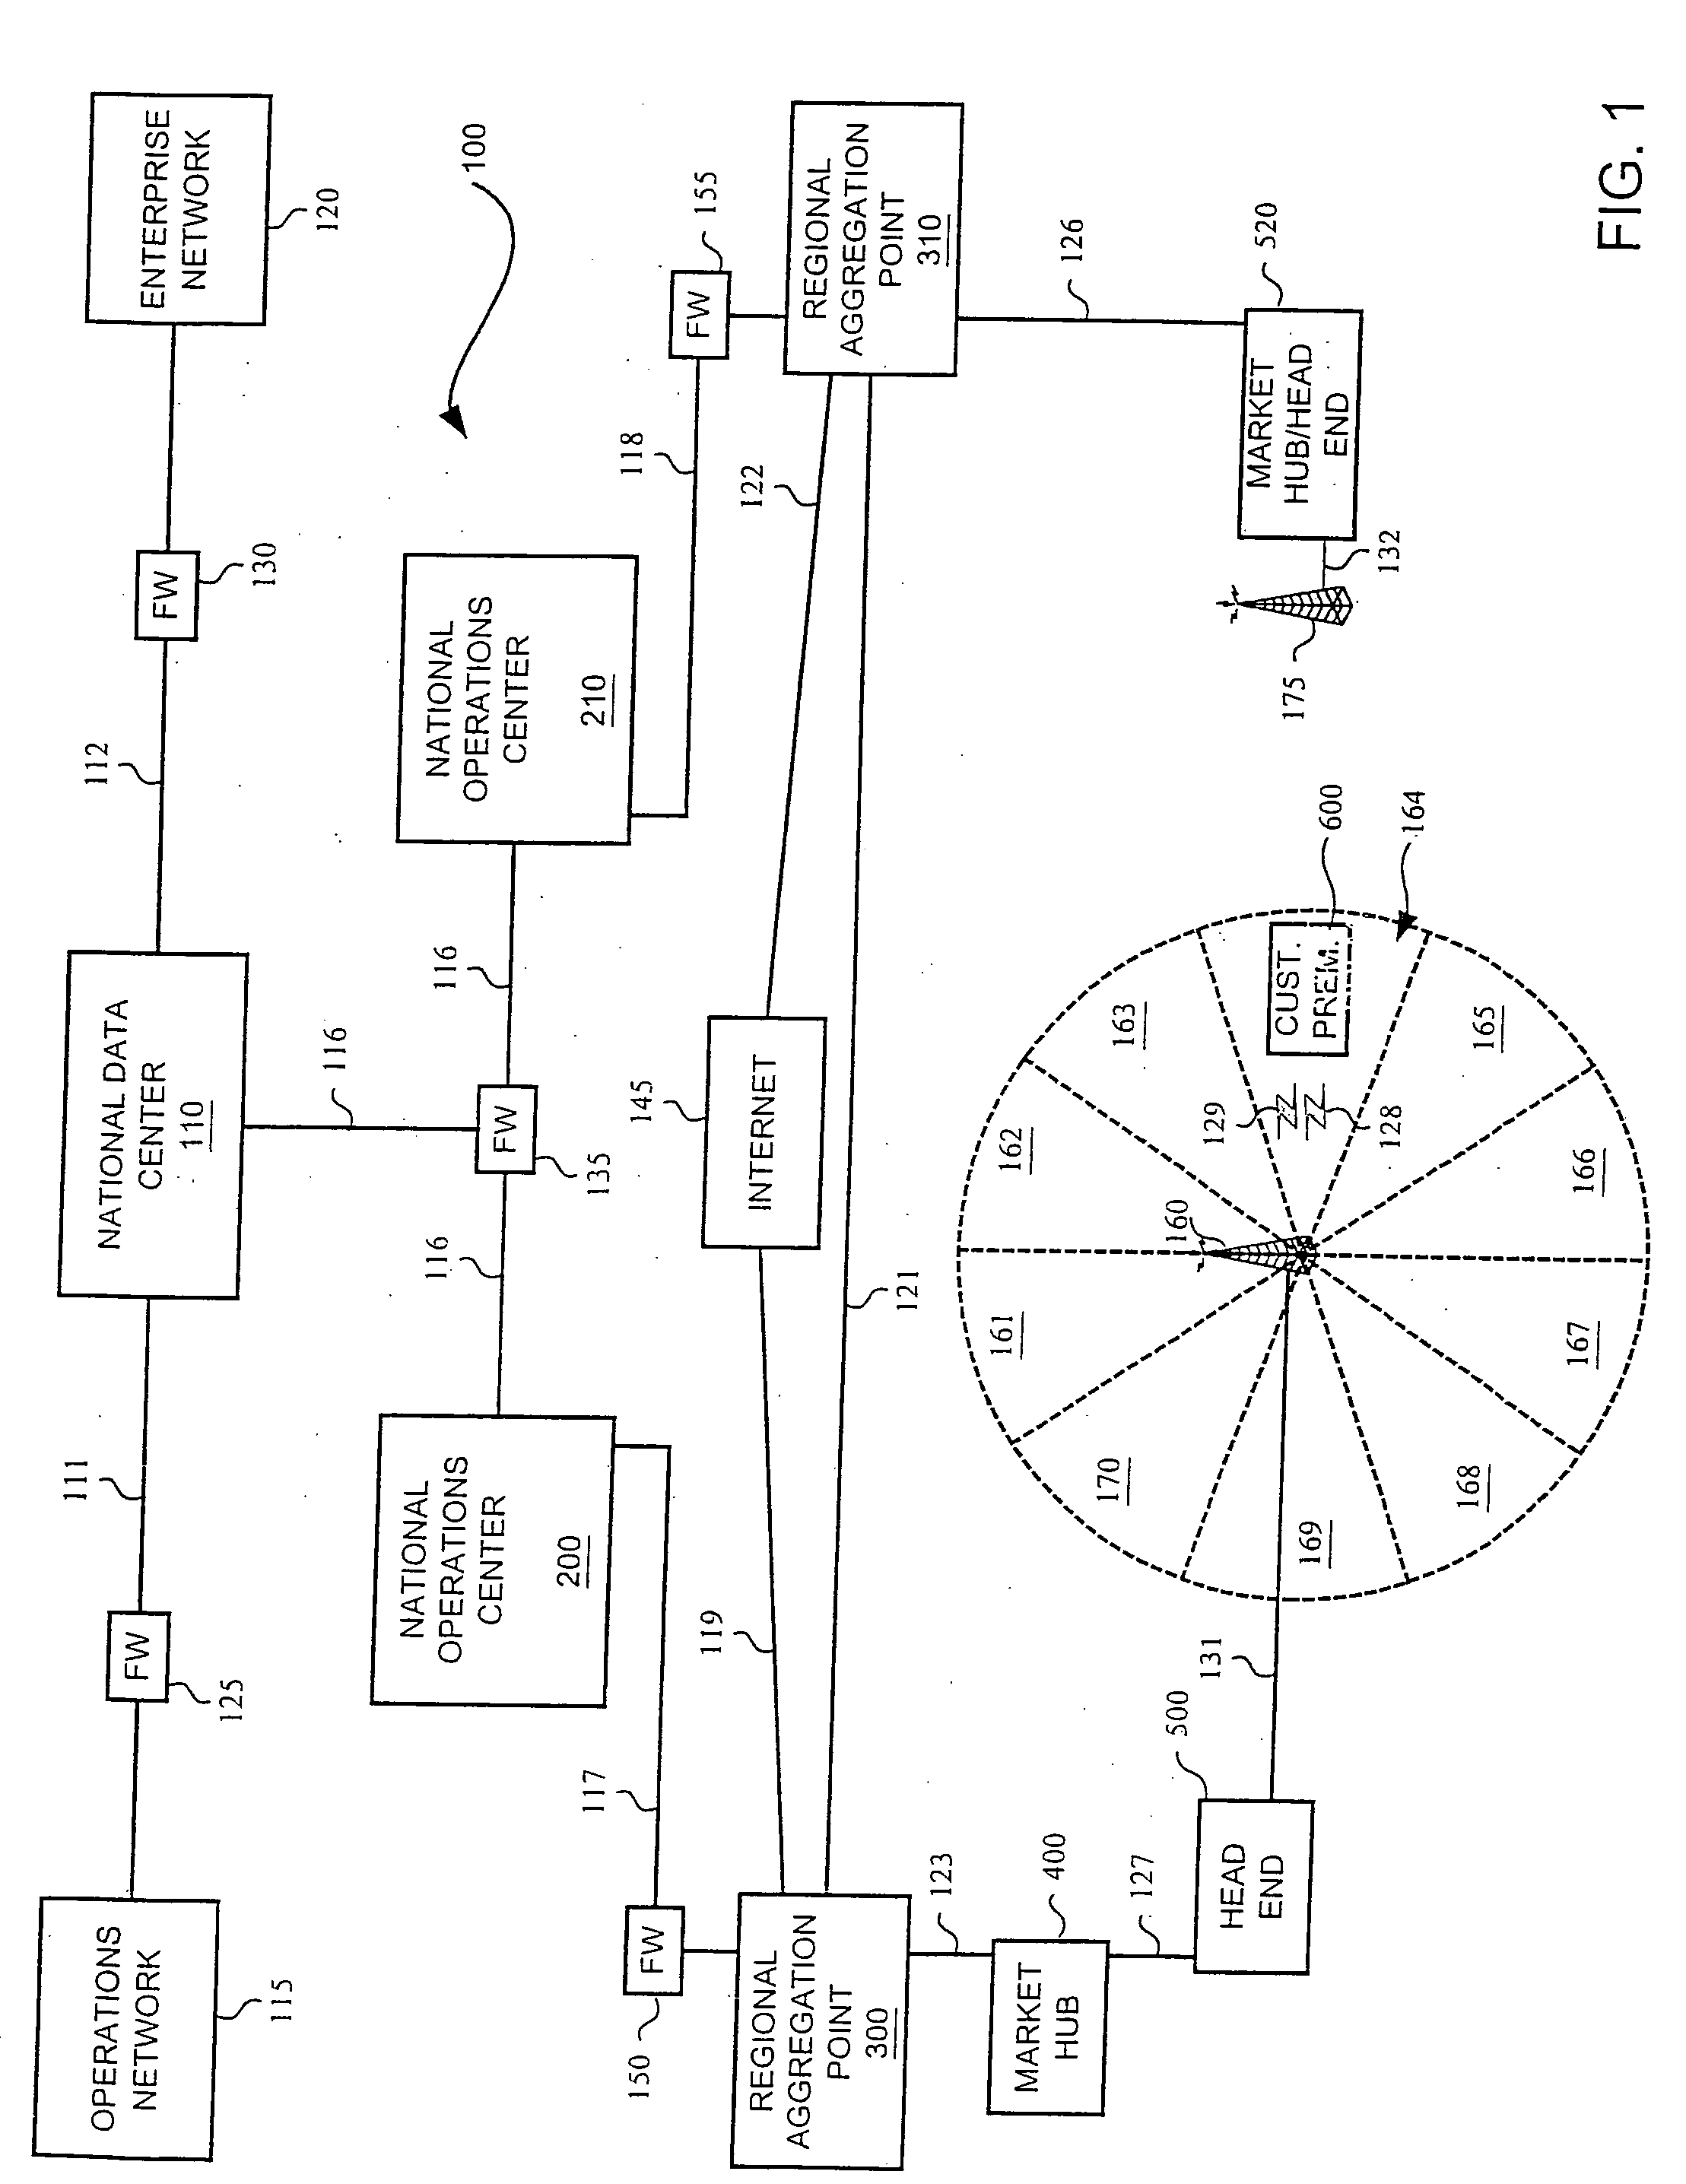 Credit transmission rate control for a wireless communication system